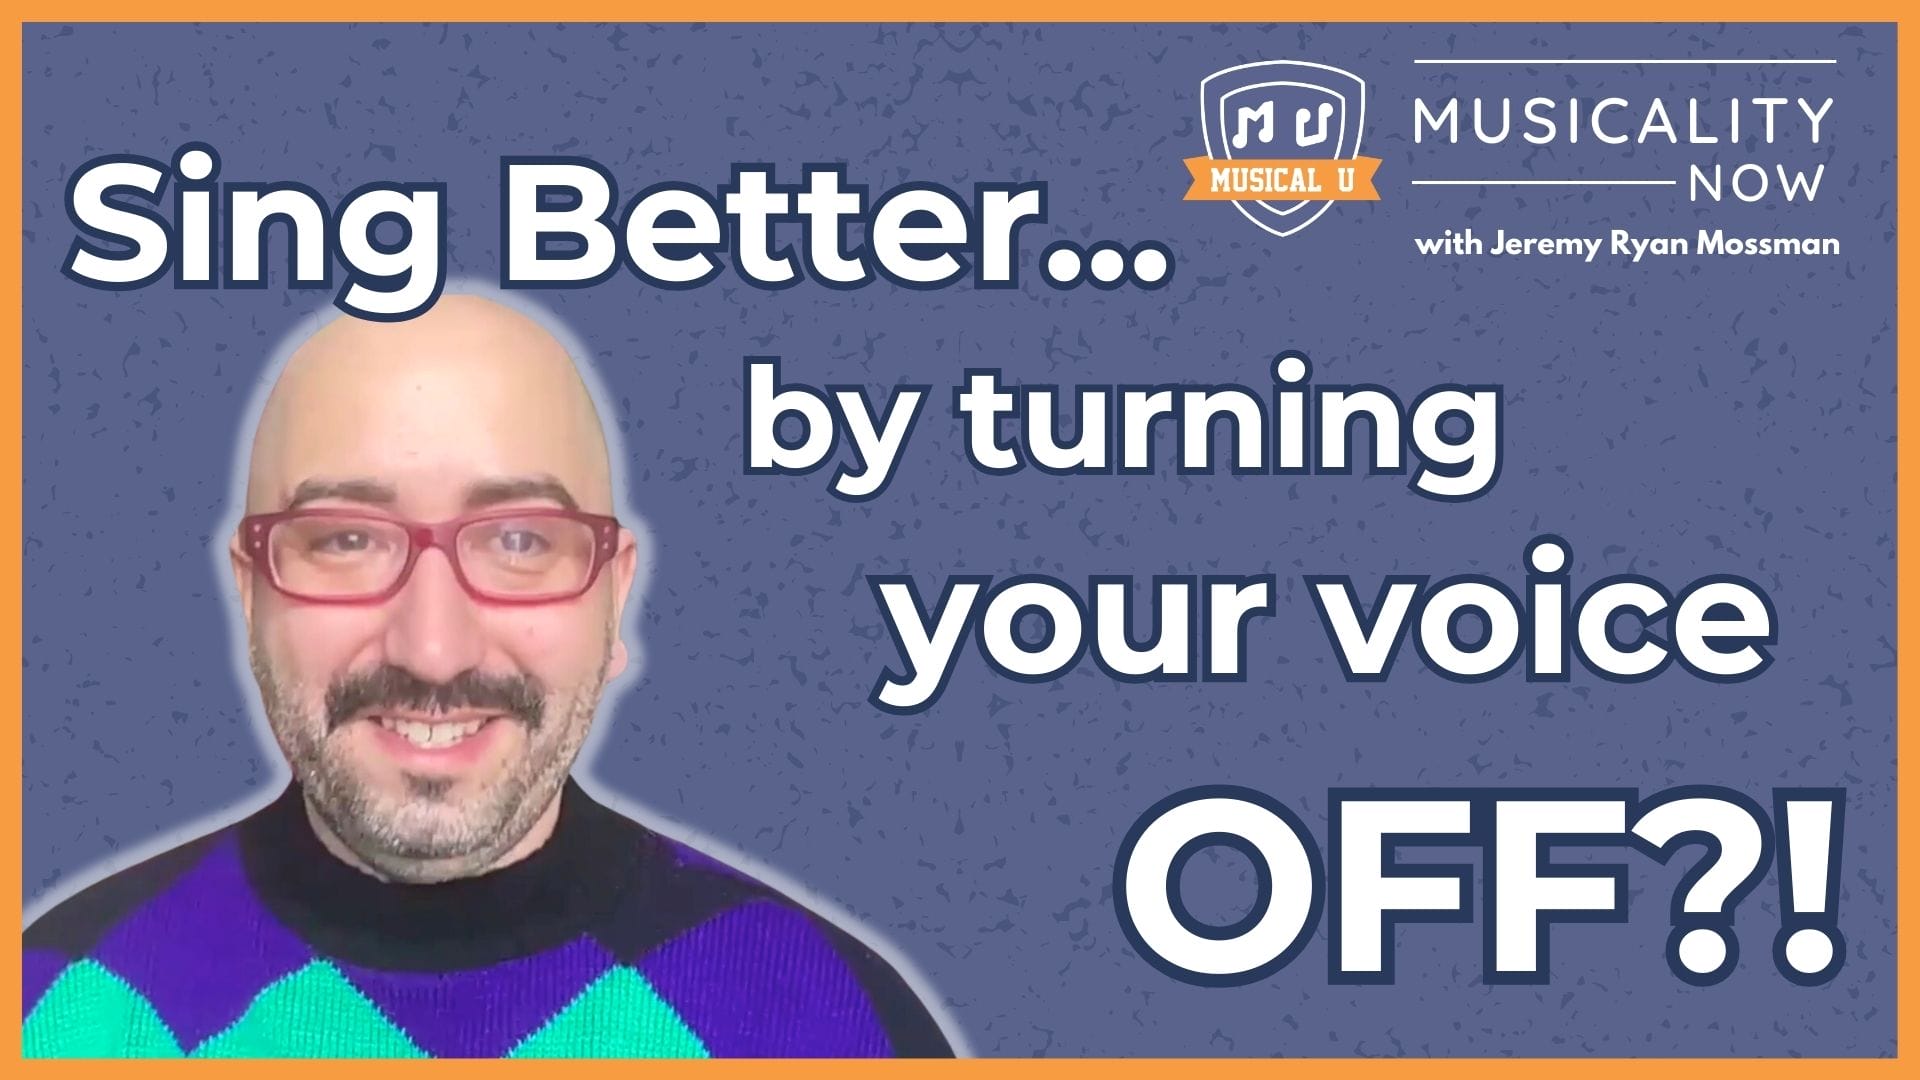 Sing Better By Turning Your Voice OFF?! (with Jeremy Ryan Mossman, Body Based Voice)